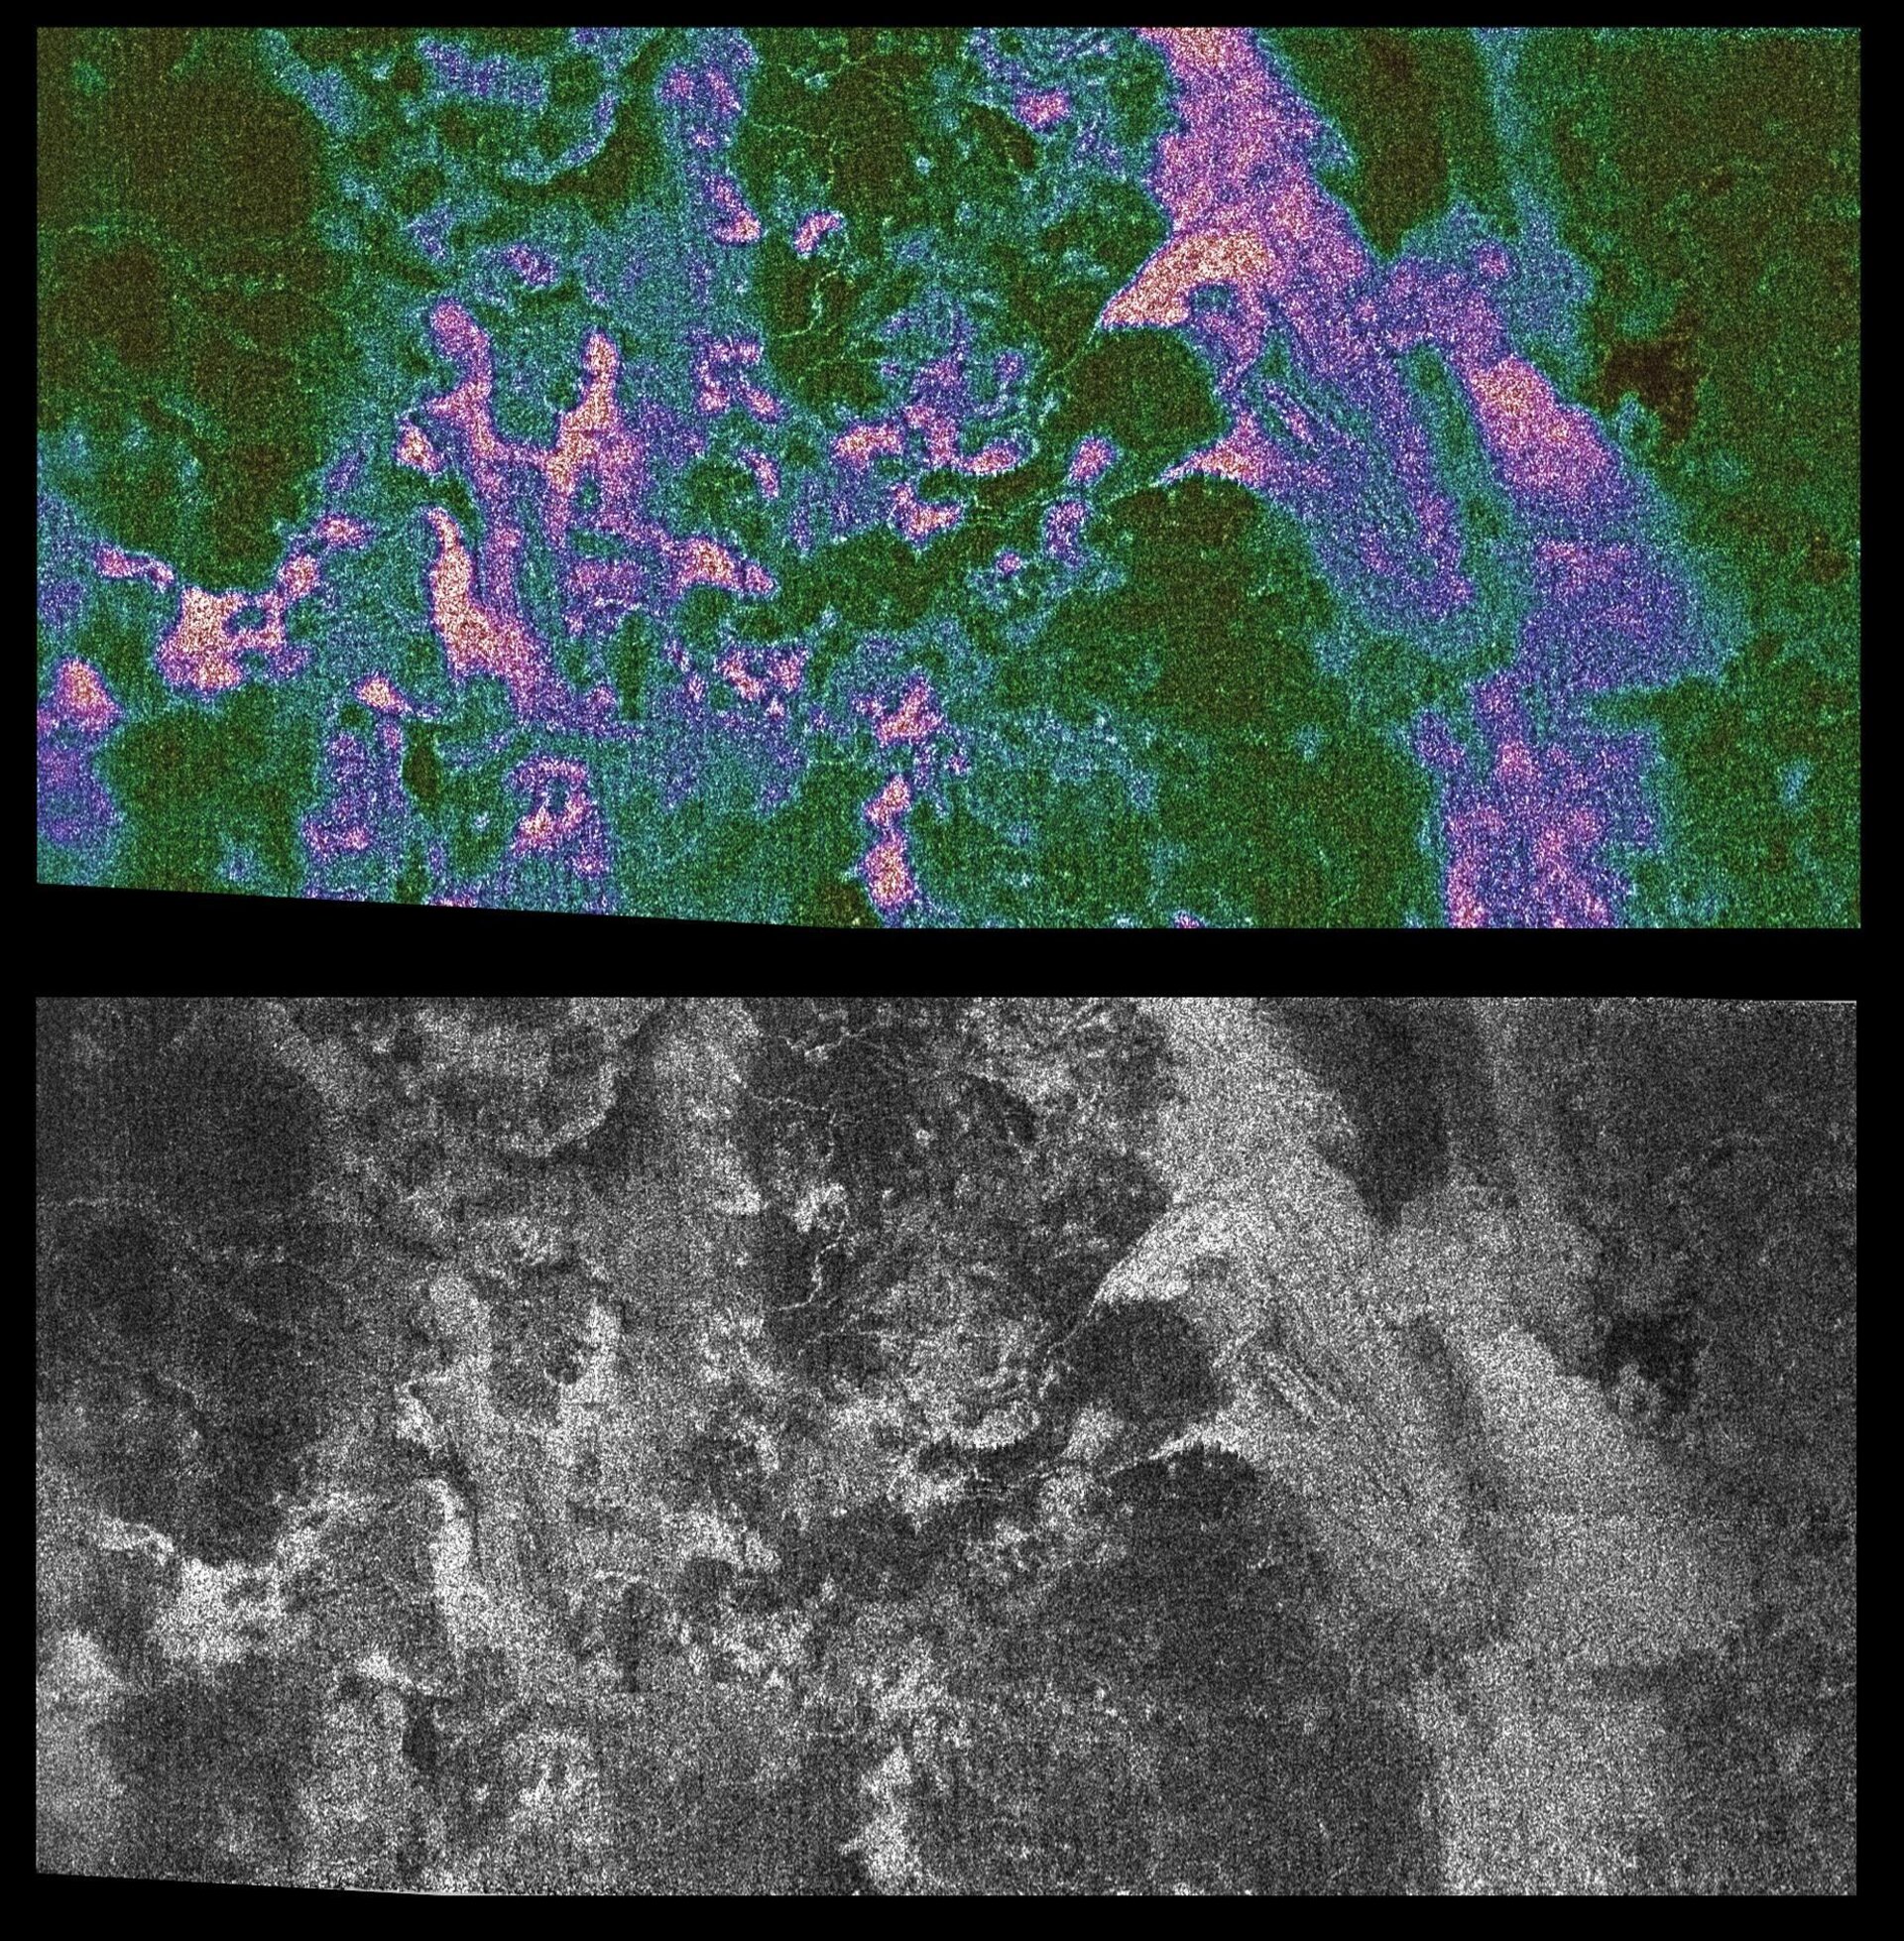 Radar images of Titan live and in colour